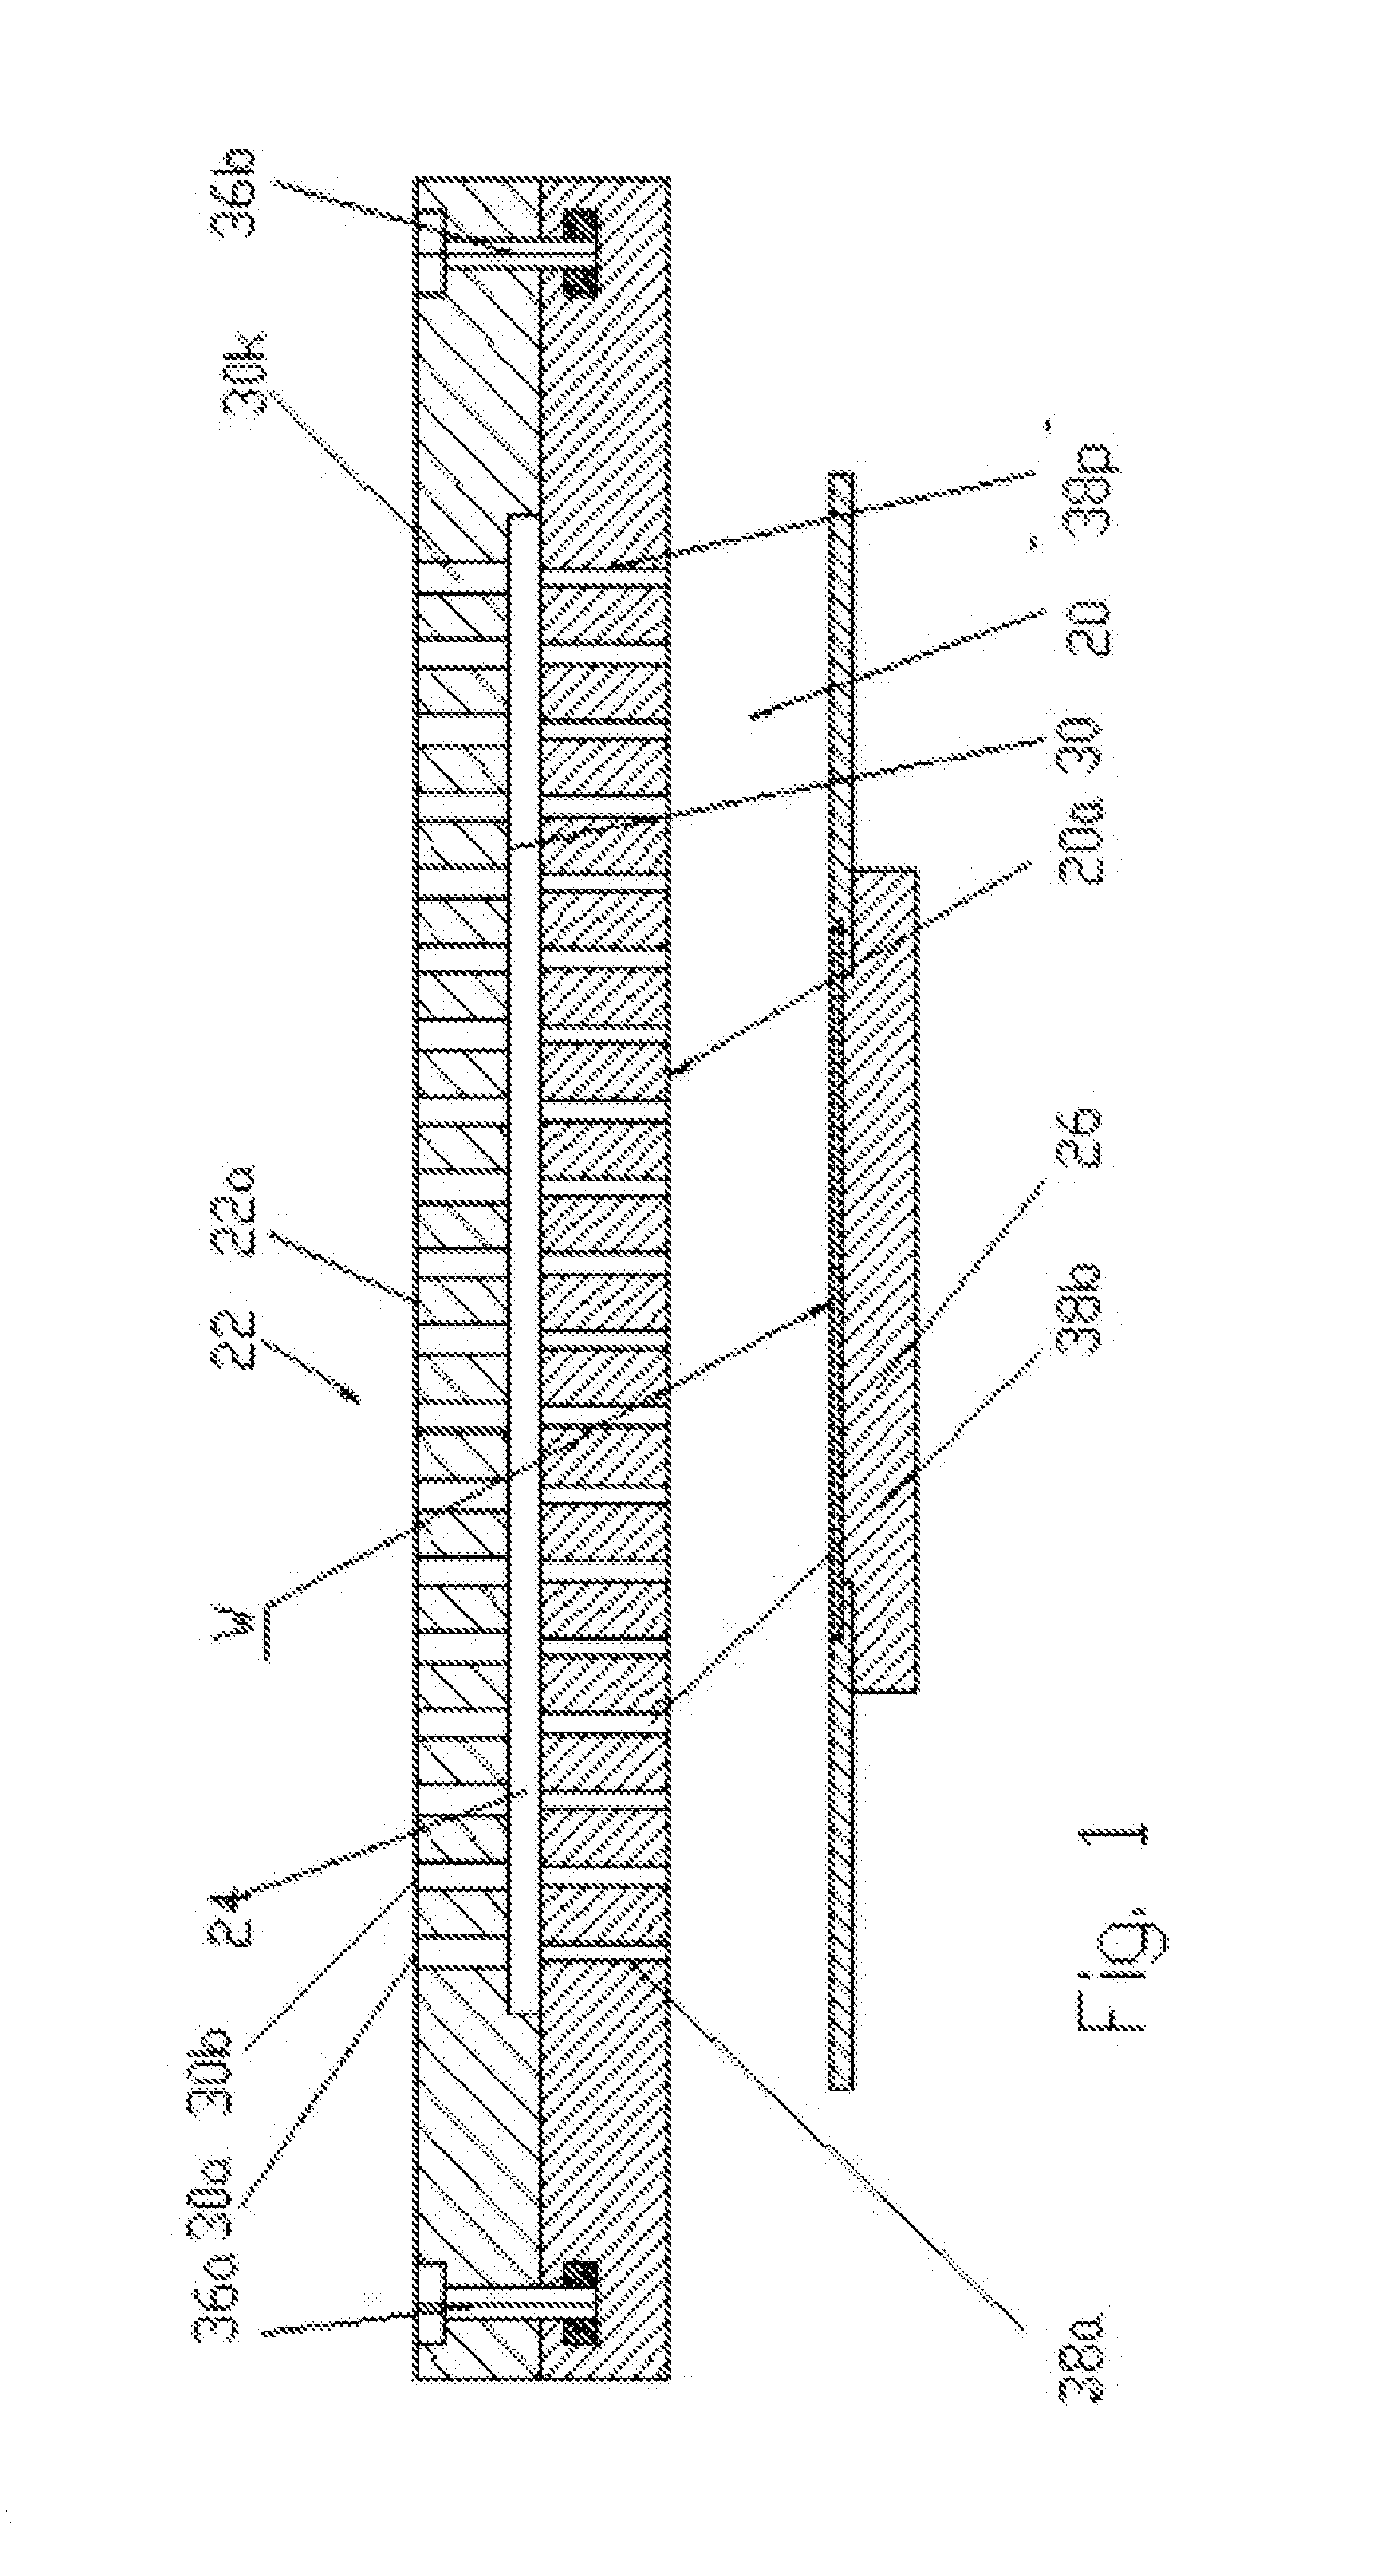 Showerhead-cooler system of a semiconductor-processing chamber for semiconductor wafers of large area